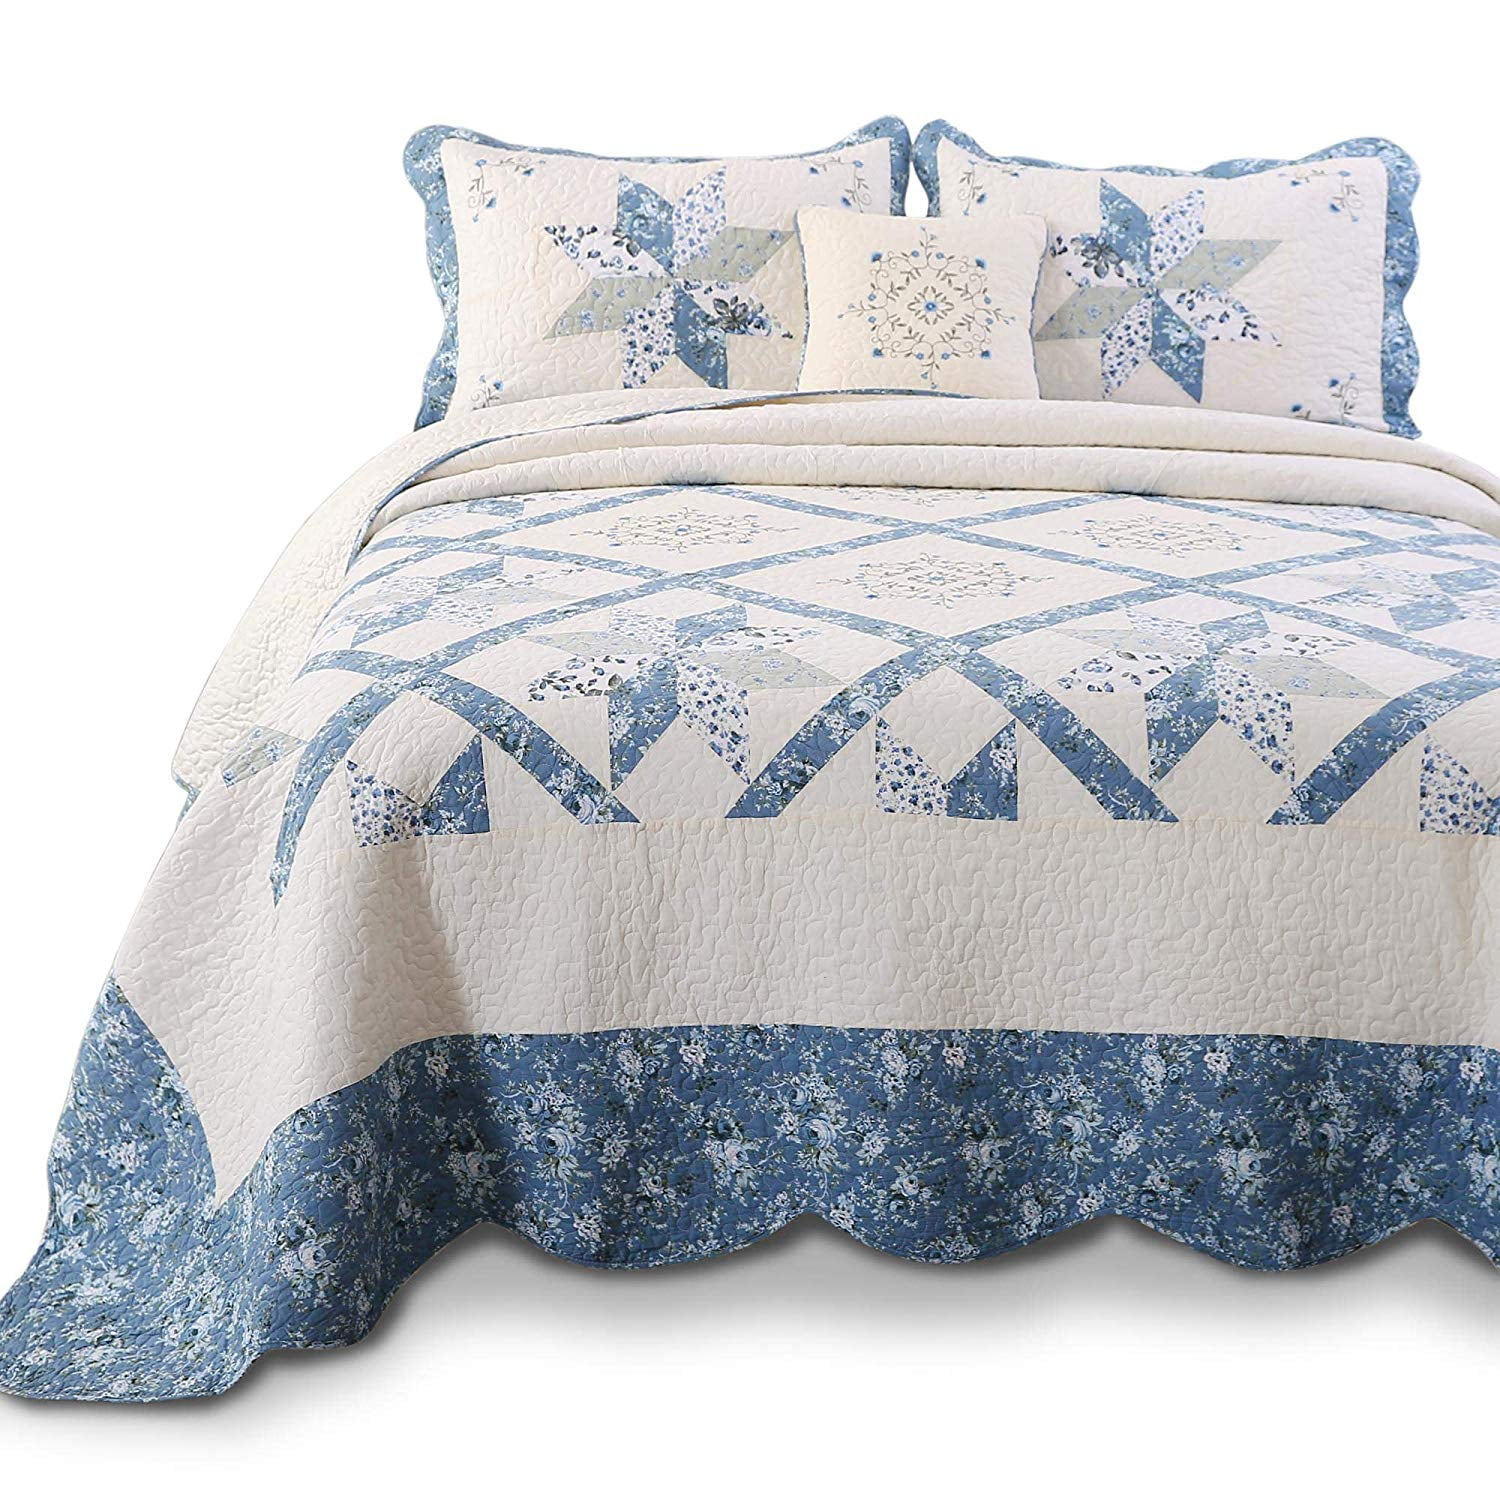 Coverlet Quilt 100% Cotton No Polyester Fill King Single 195x235 Blue Patchwork 